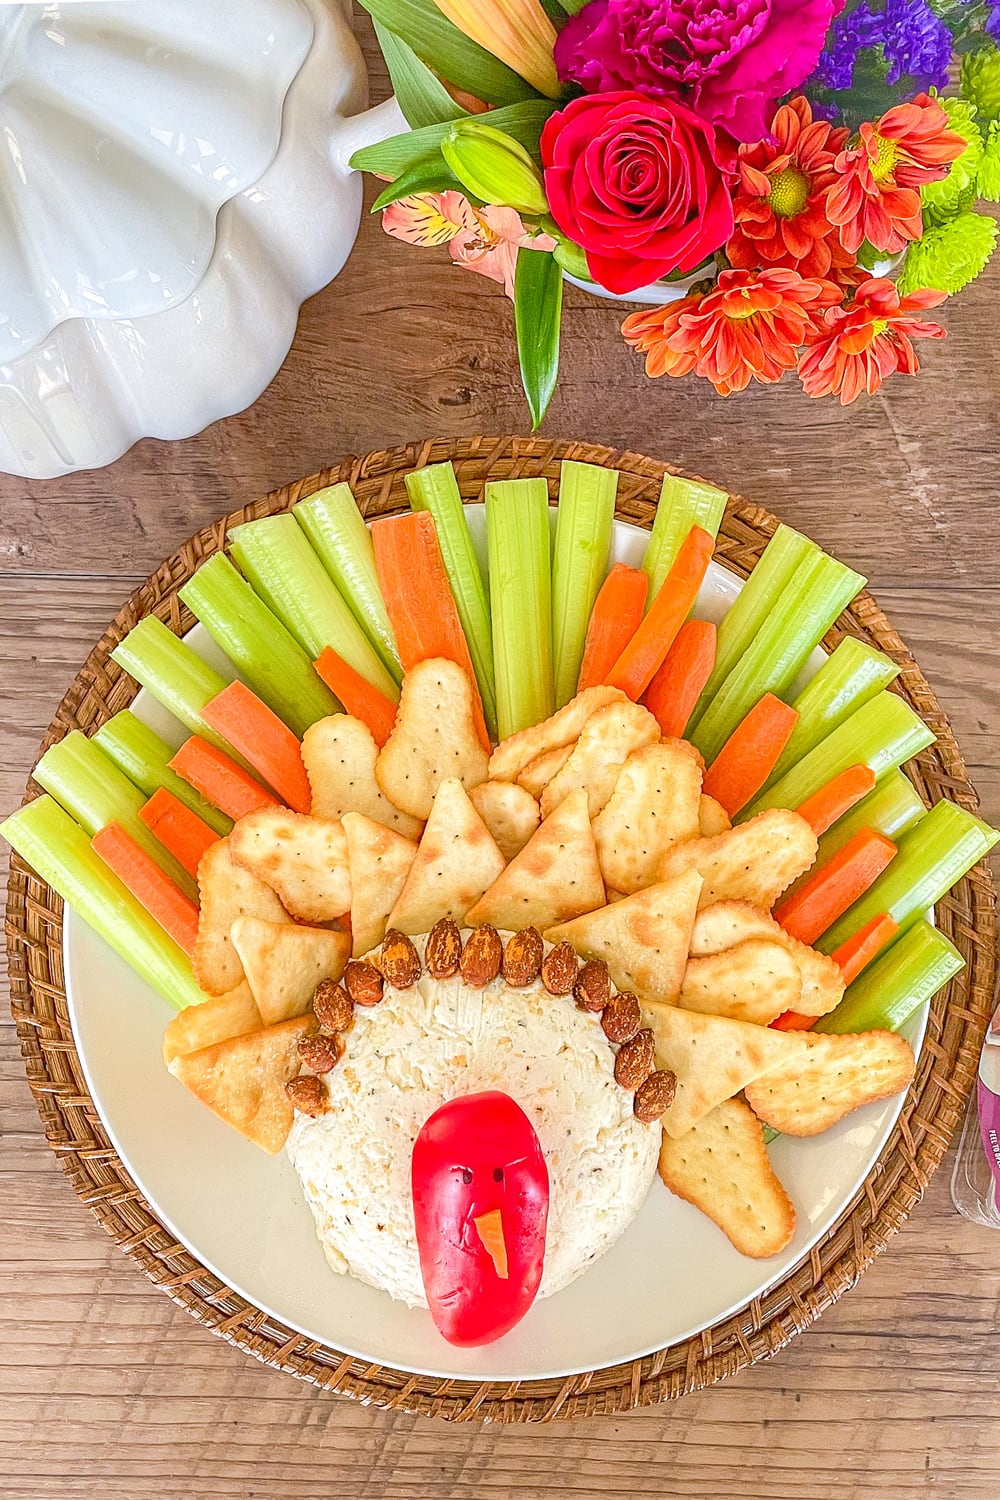 Cheese ball made to resemble a turkey with a red pepper face, and carrots, celery and crackers for the feathers.